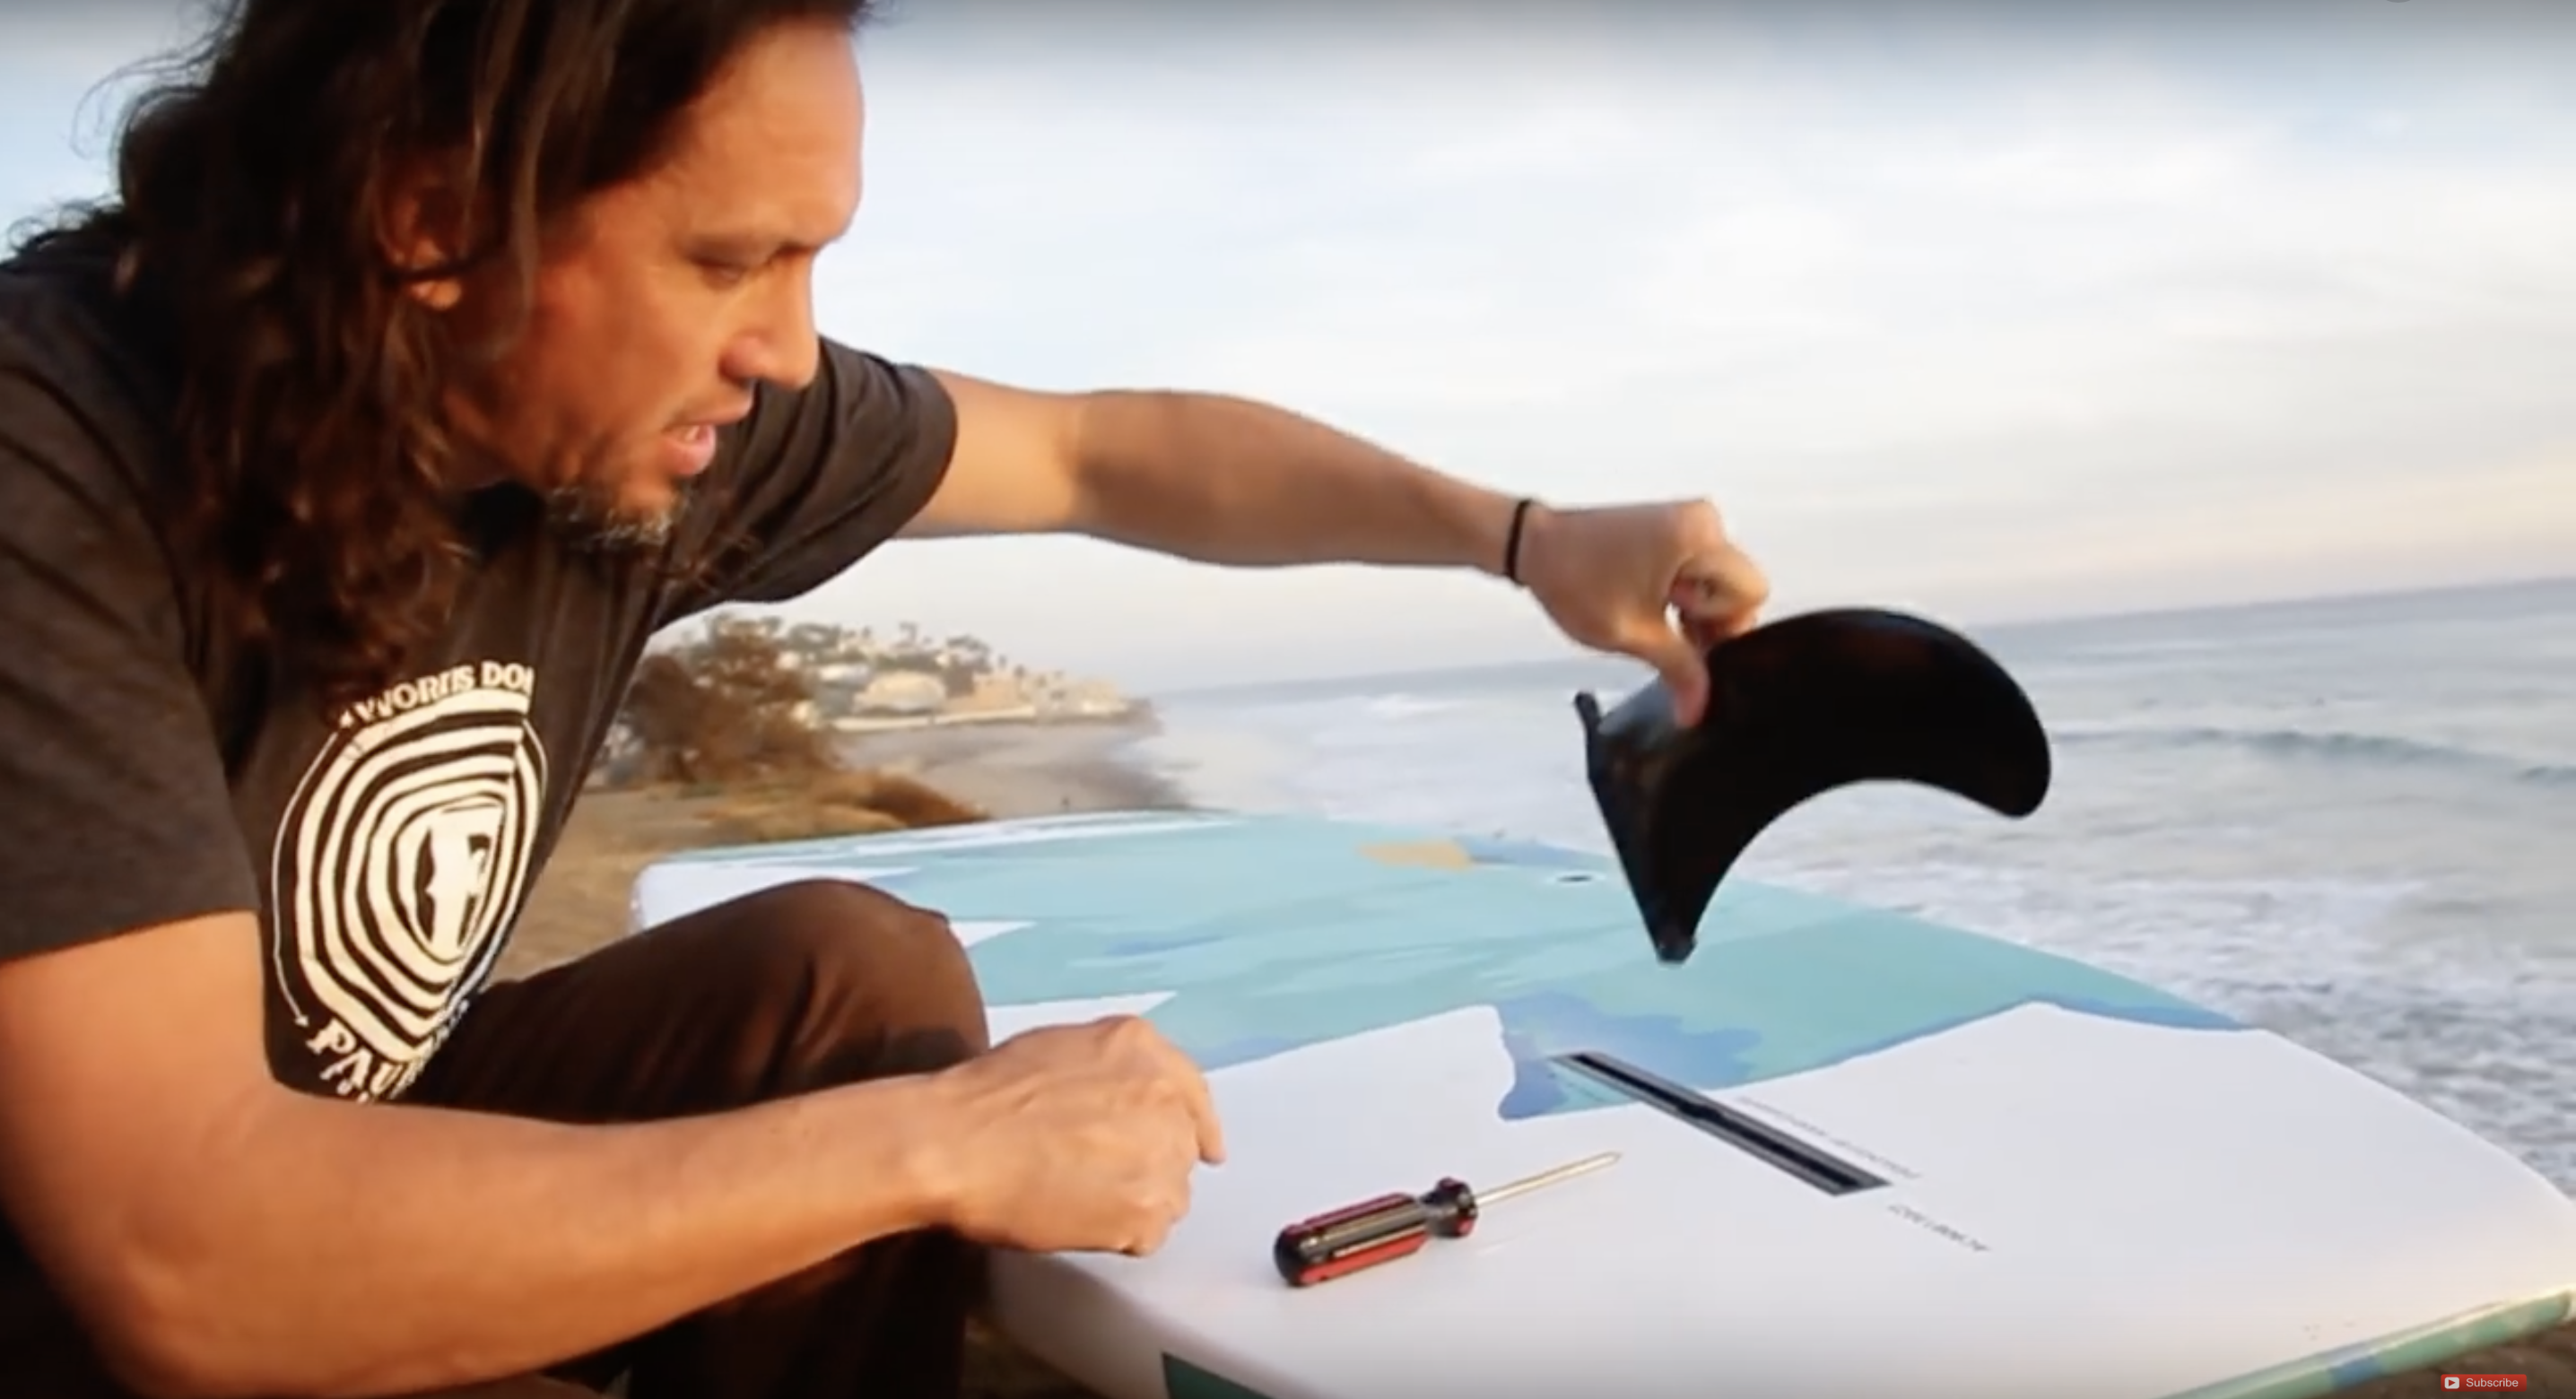 How To: Install a Fin Into a Stand Up Paddle Board